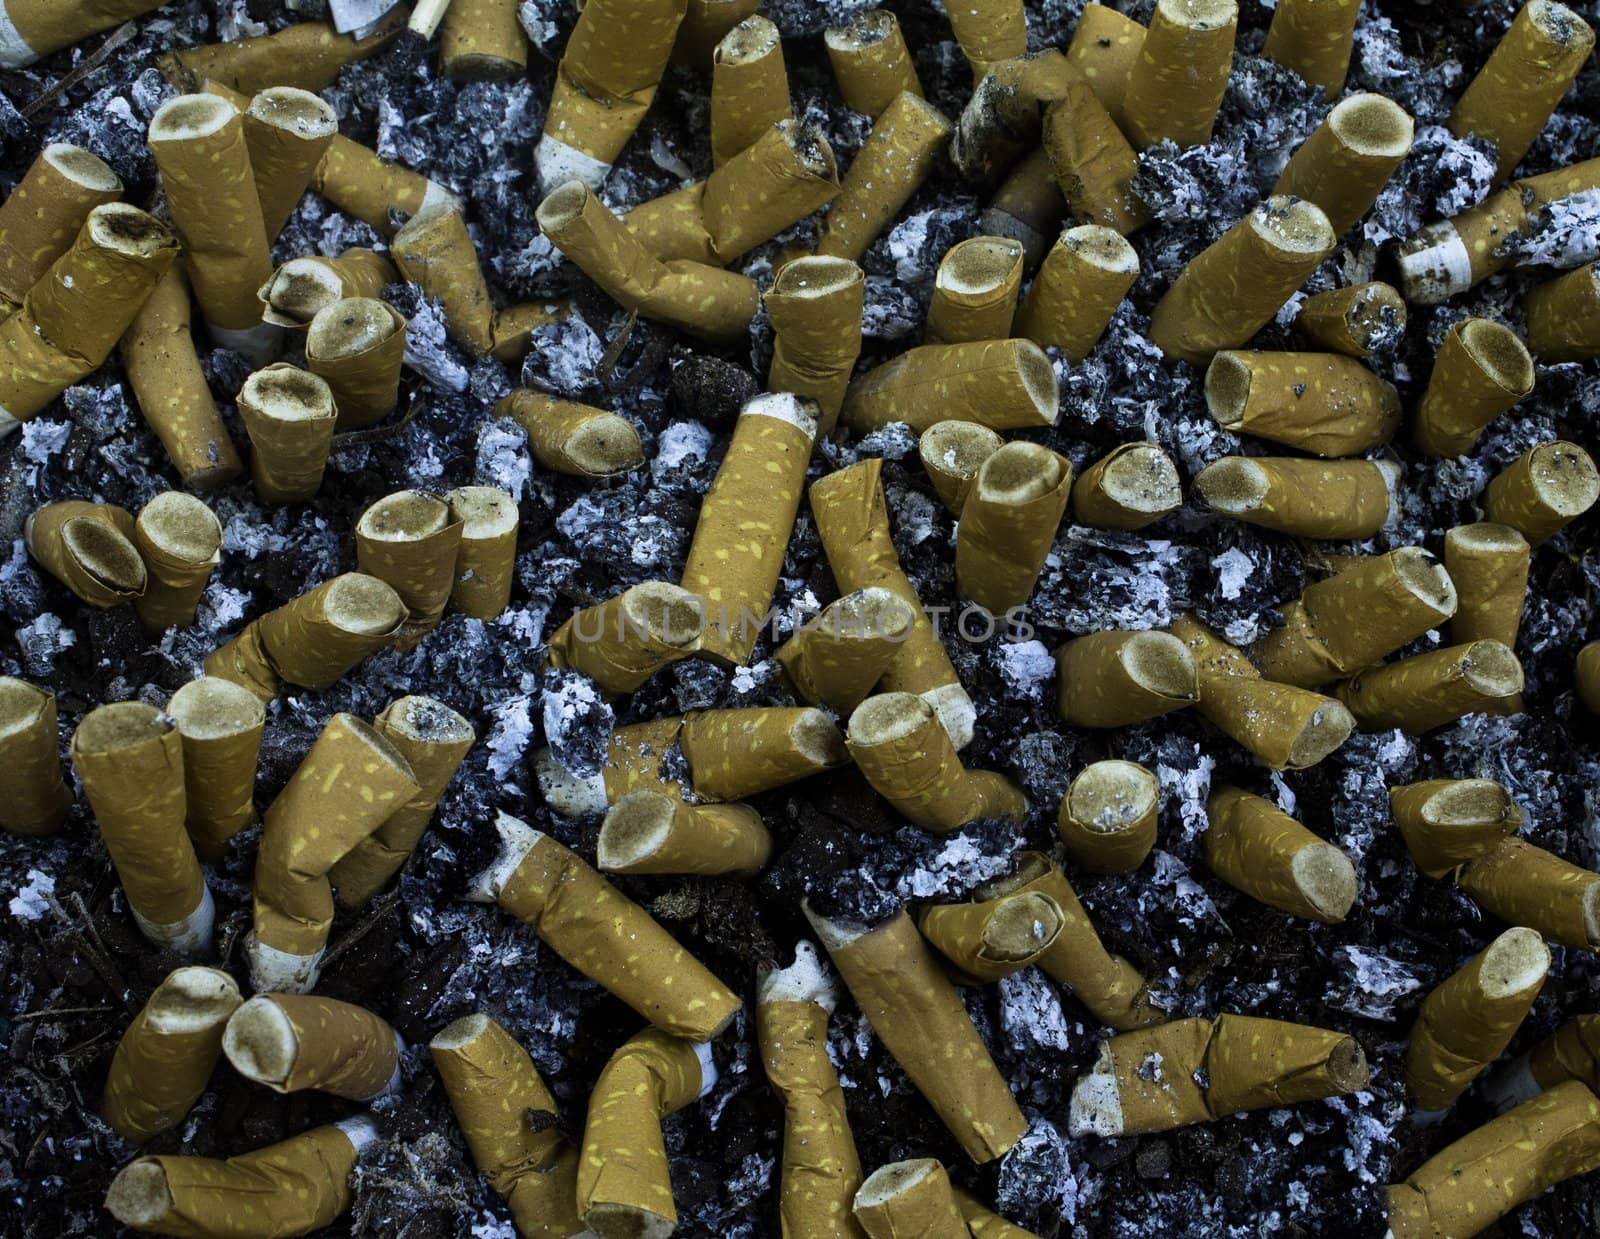 Thousands of cigarettes filters in a ashtray